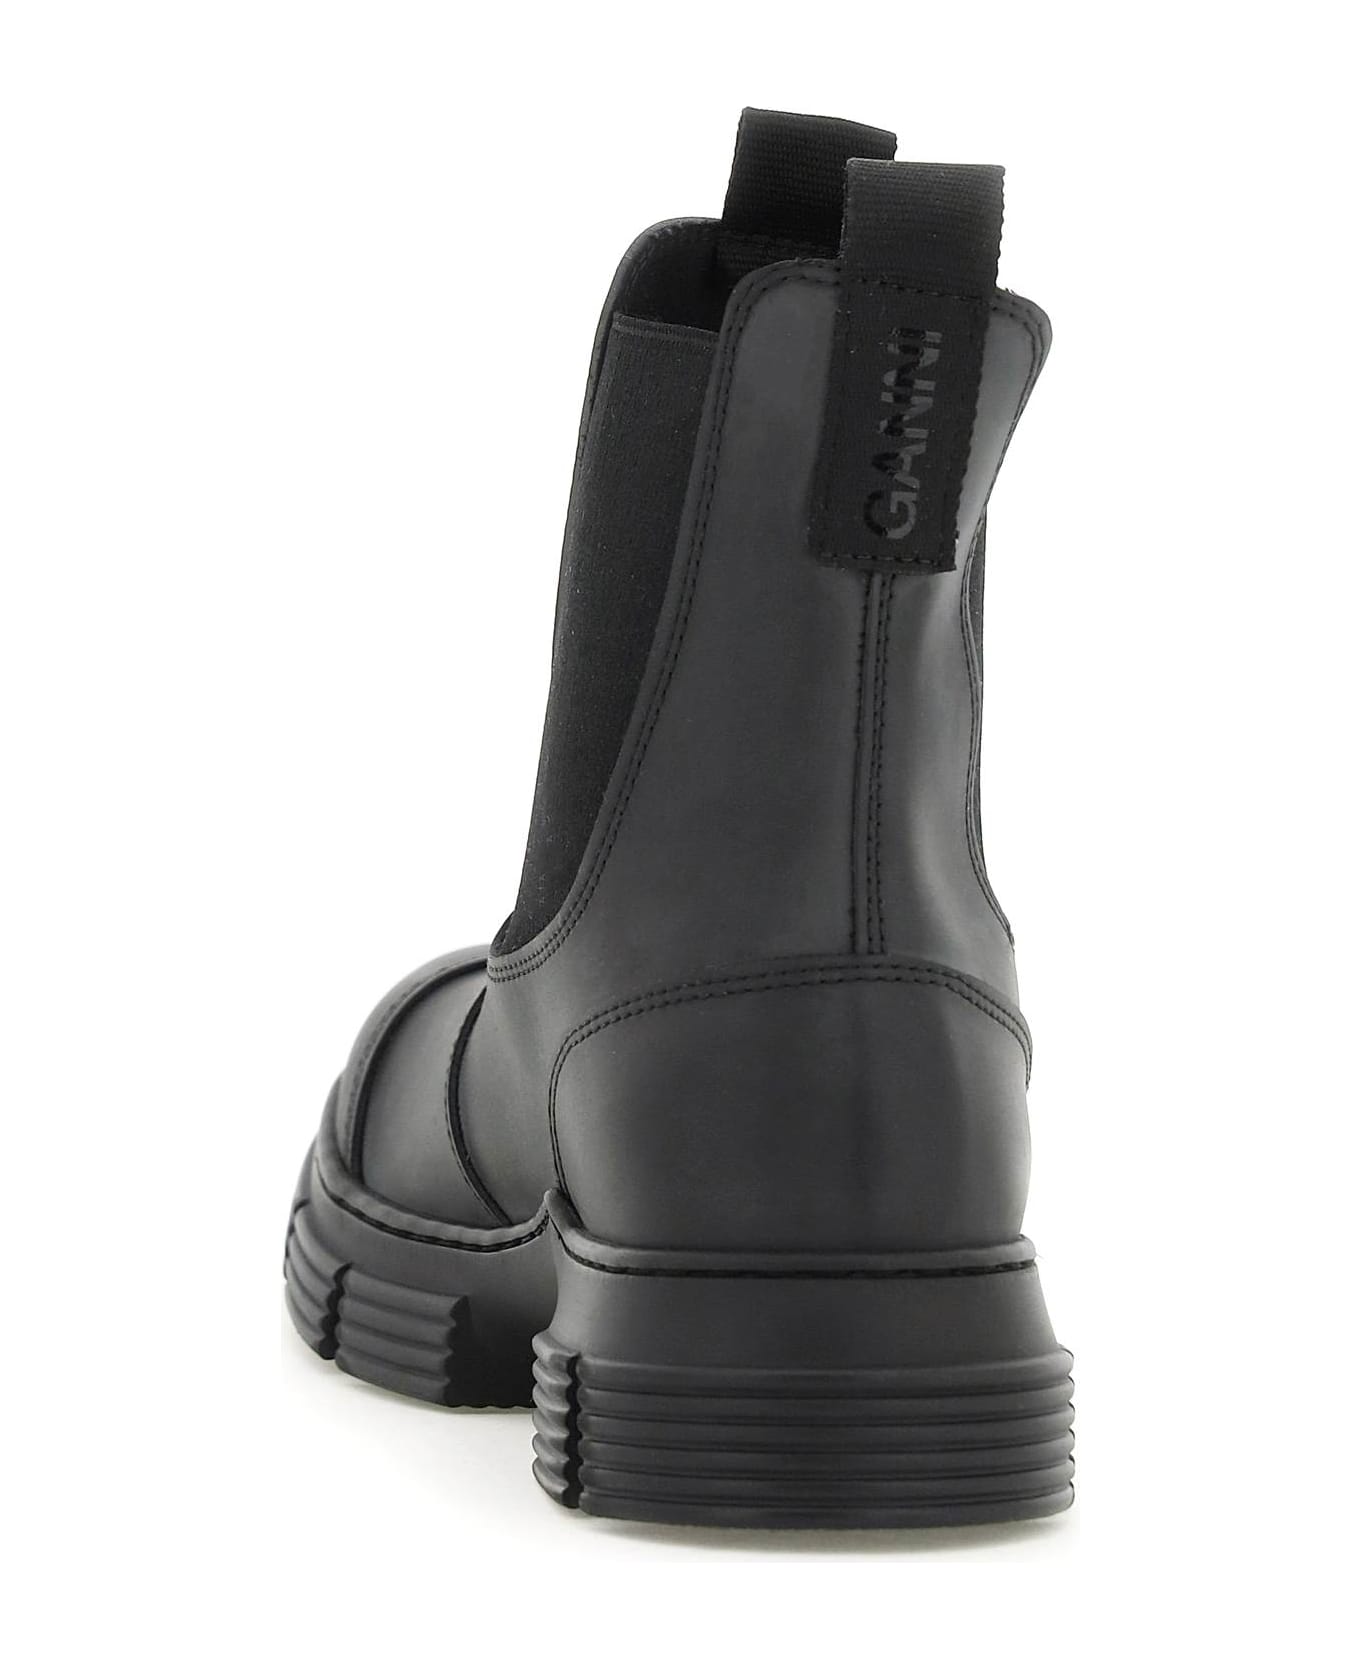 Ganni Recycled Rubber Chelsea Ankle Boots - BLACK (Black) ブーツ